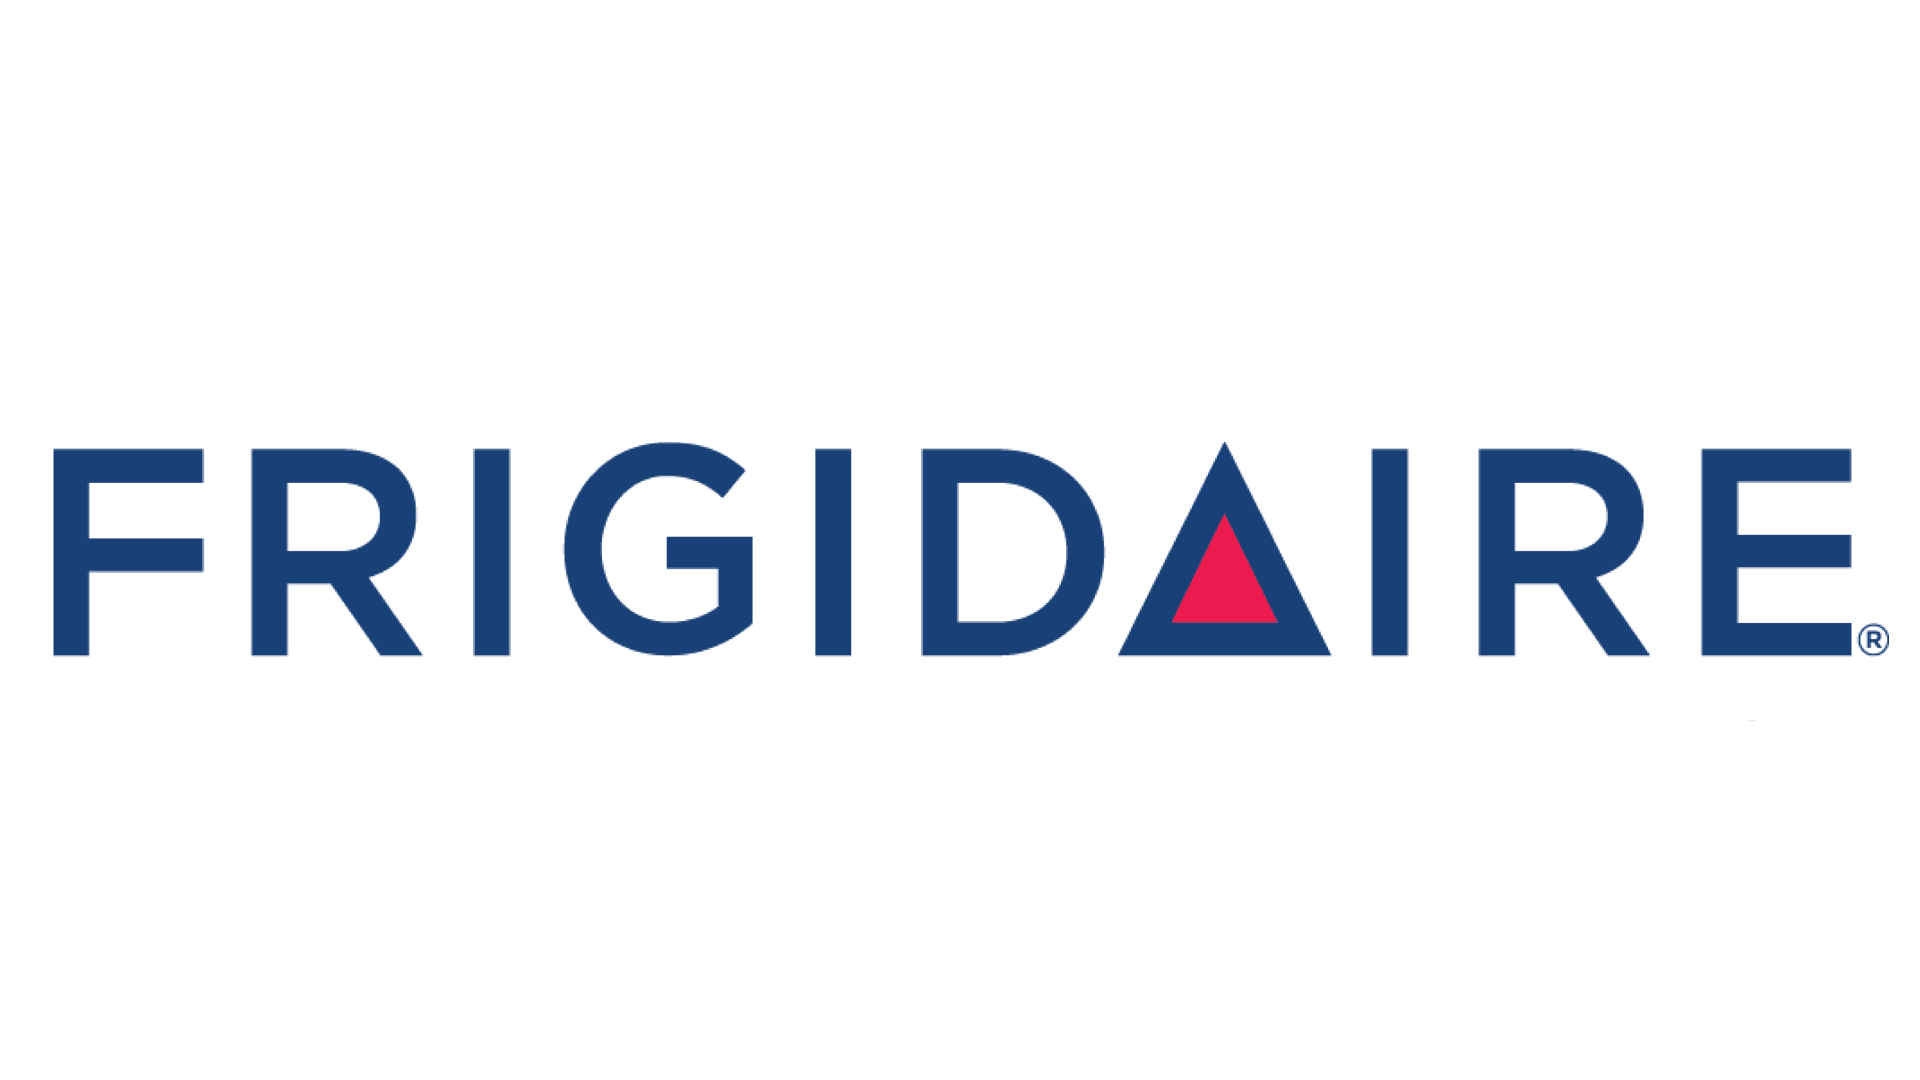 Frigidaire Logo - Frigidaire Logo, Frigidaire Symbol, Meaning, History and Evolution